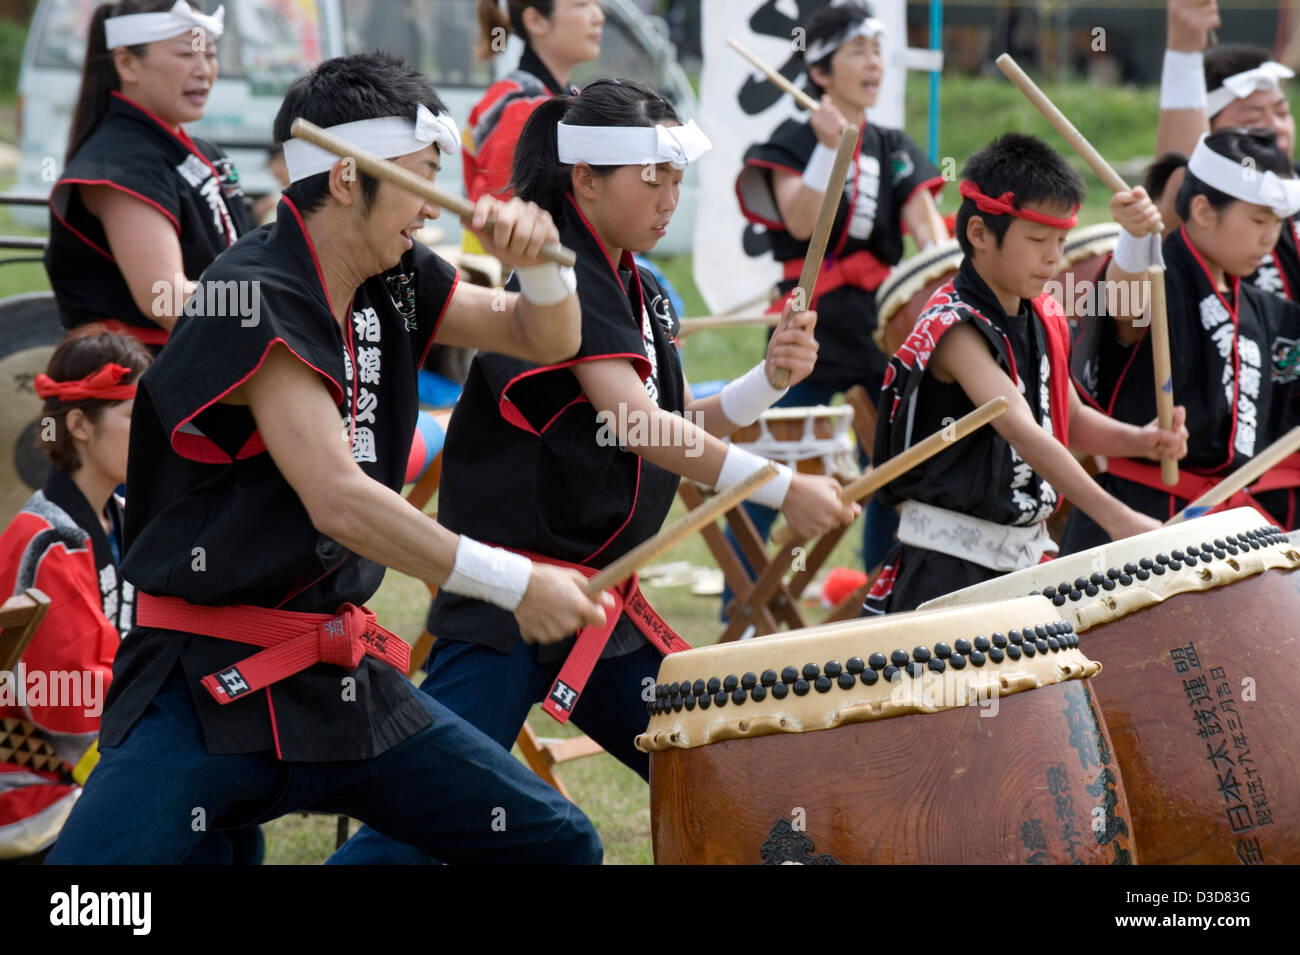 A team of energetic drummers young and old beat a musical rhythm on odaiko Japanese drums with wooden mallets at a festival. Stock Photo